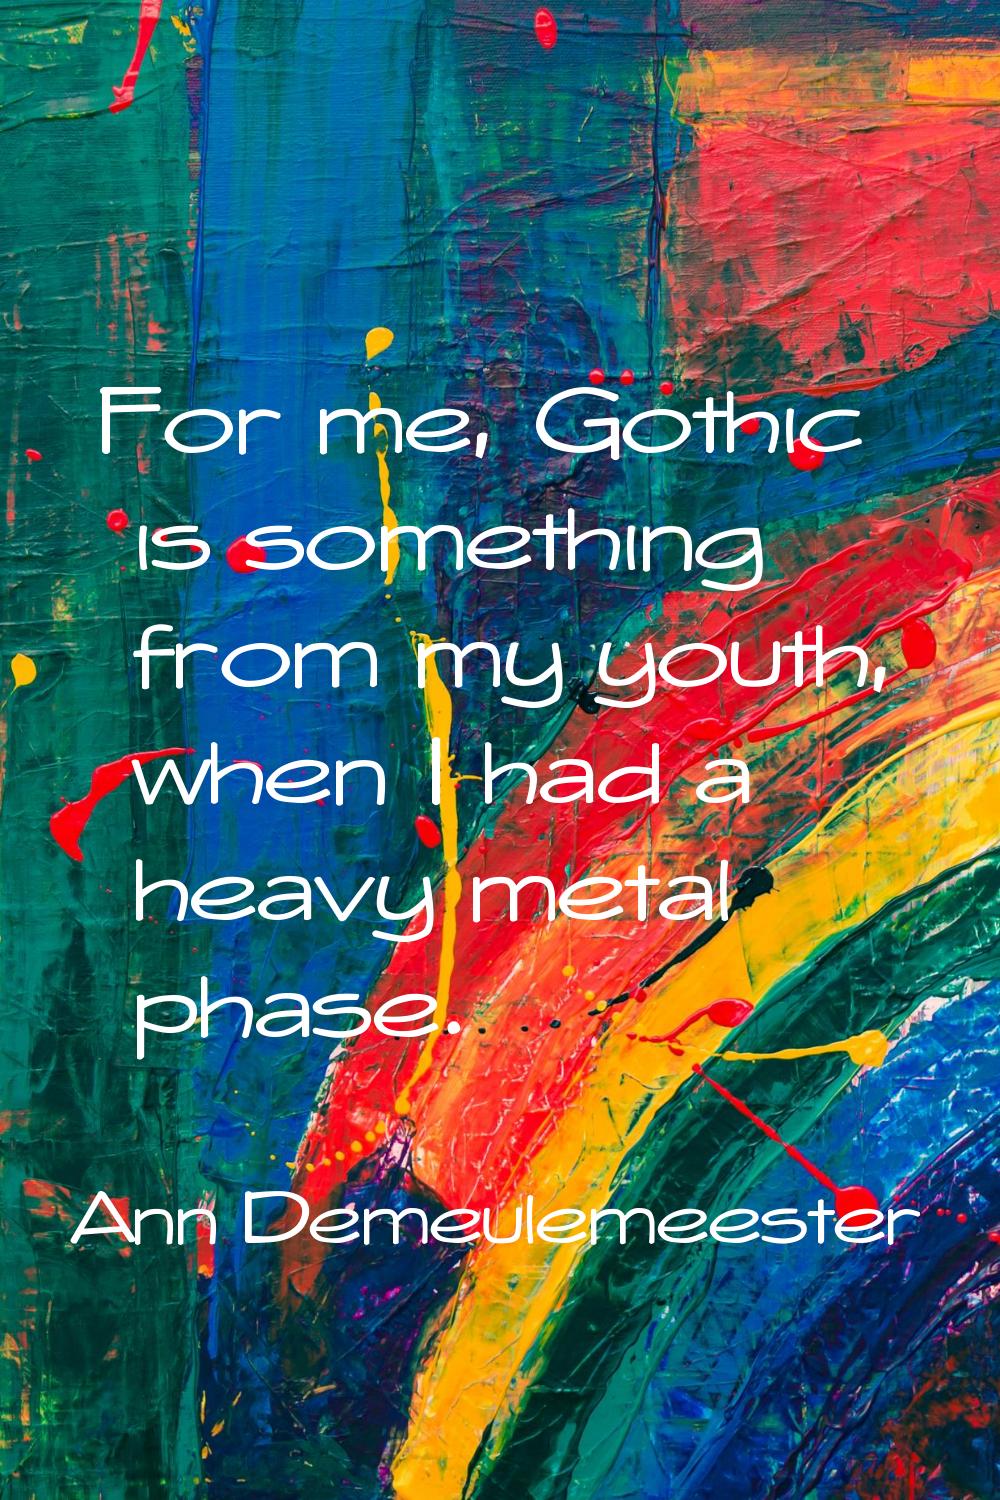 For me, Gothic is something from my youth, when I had a heavy metal phase.